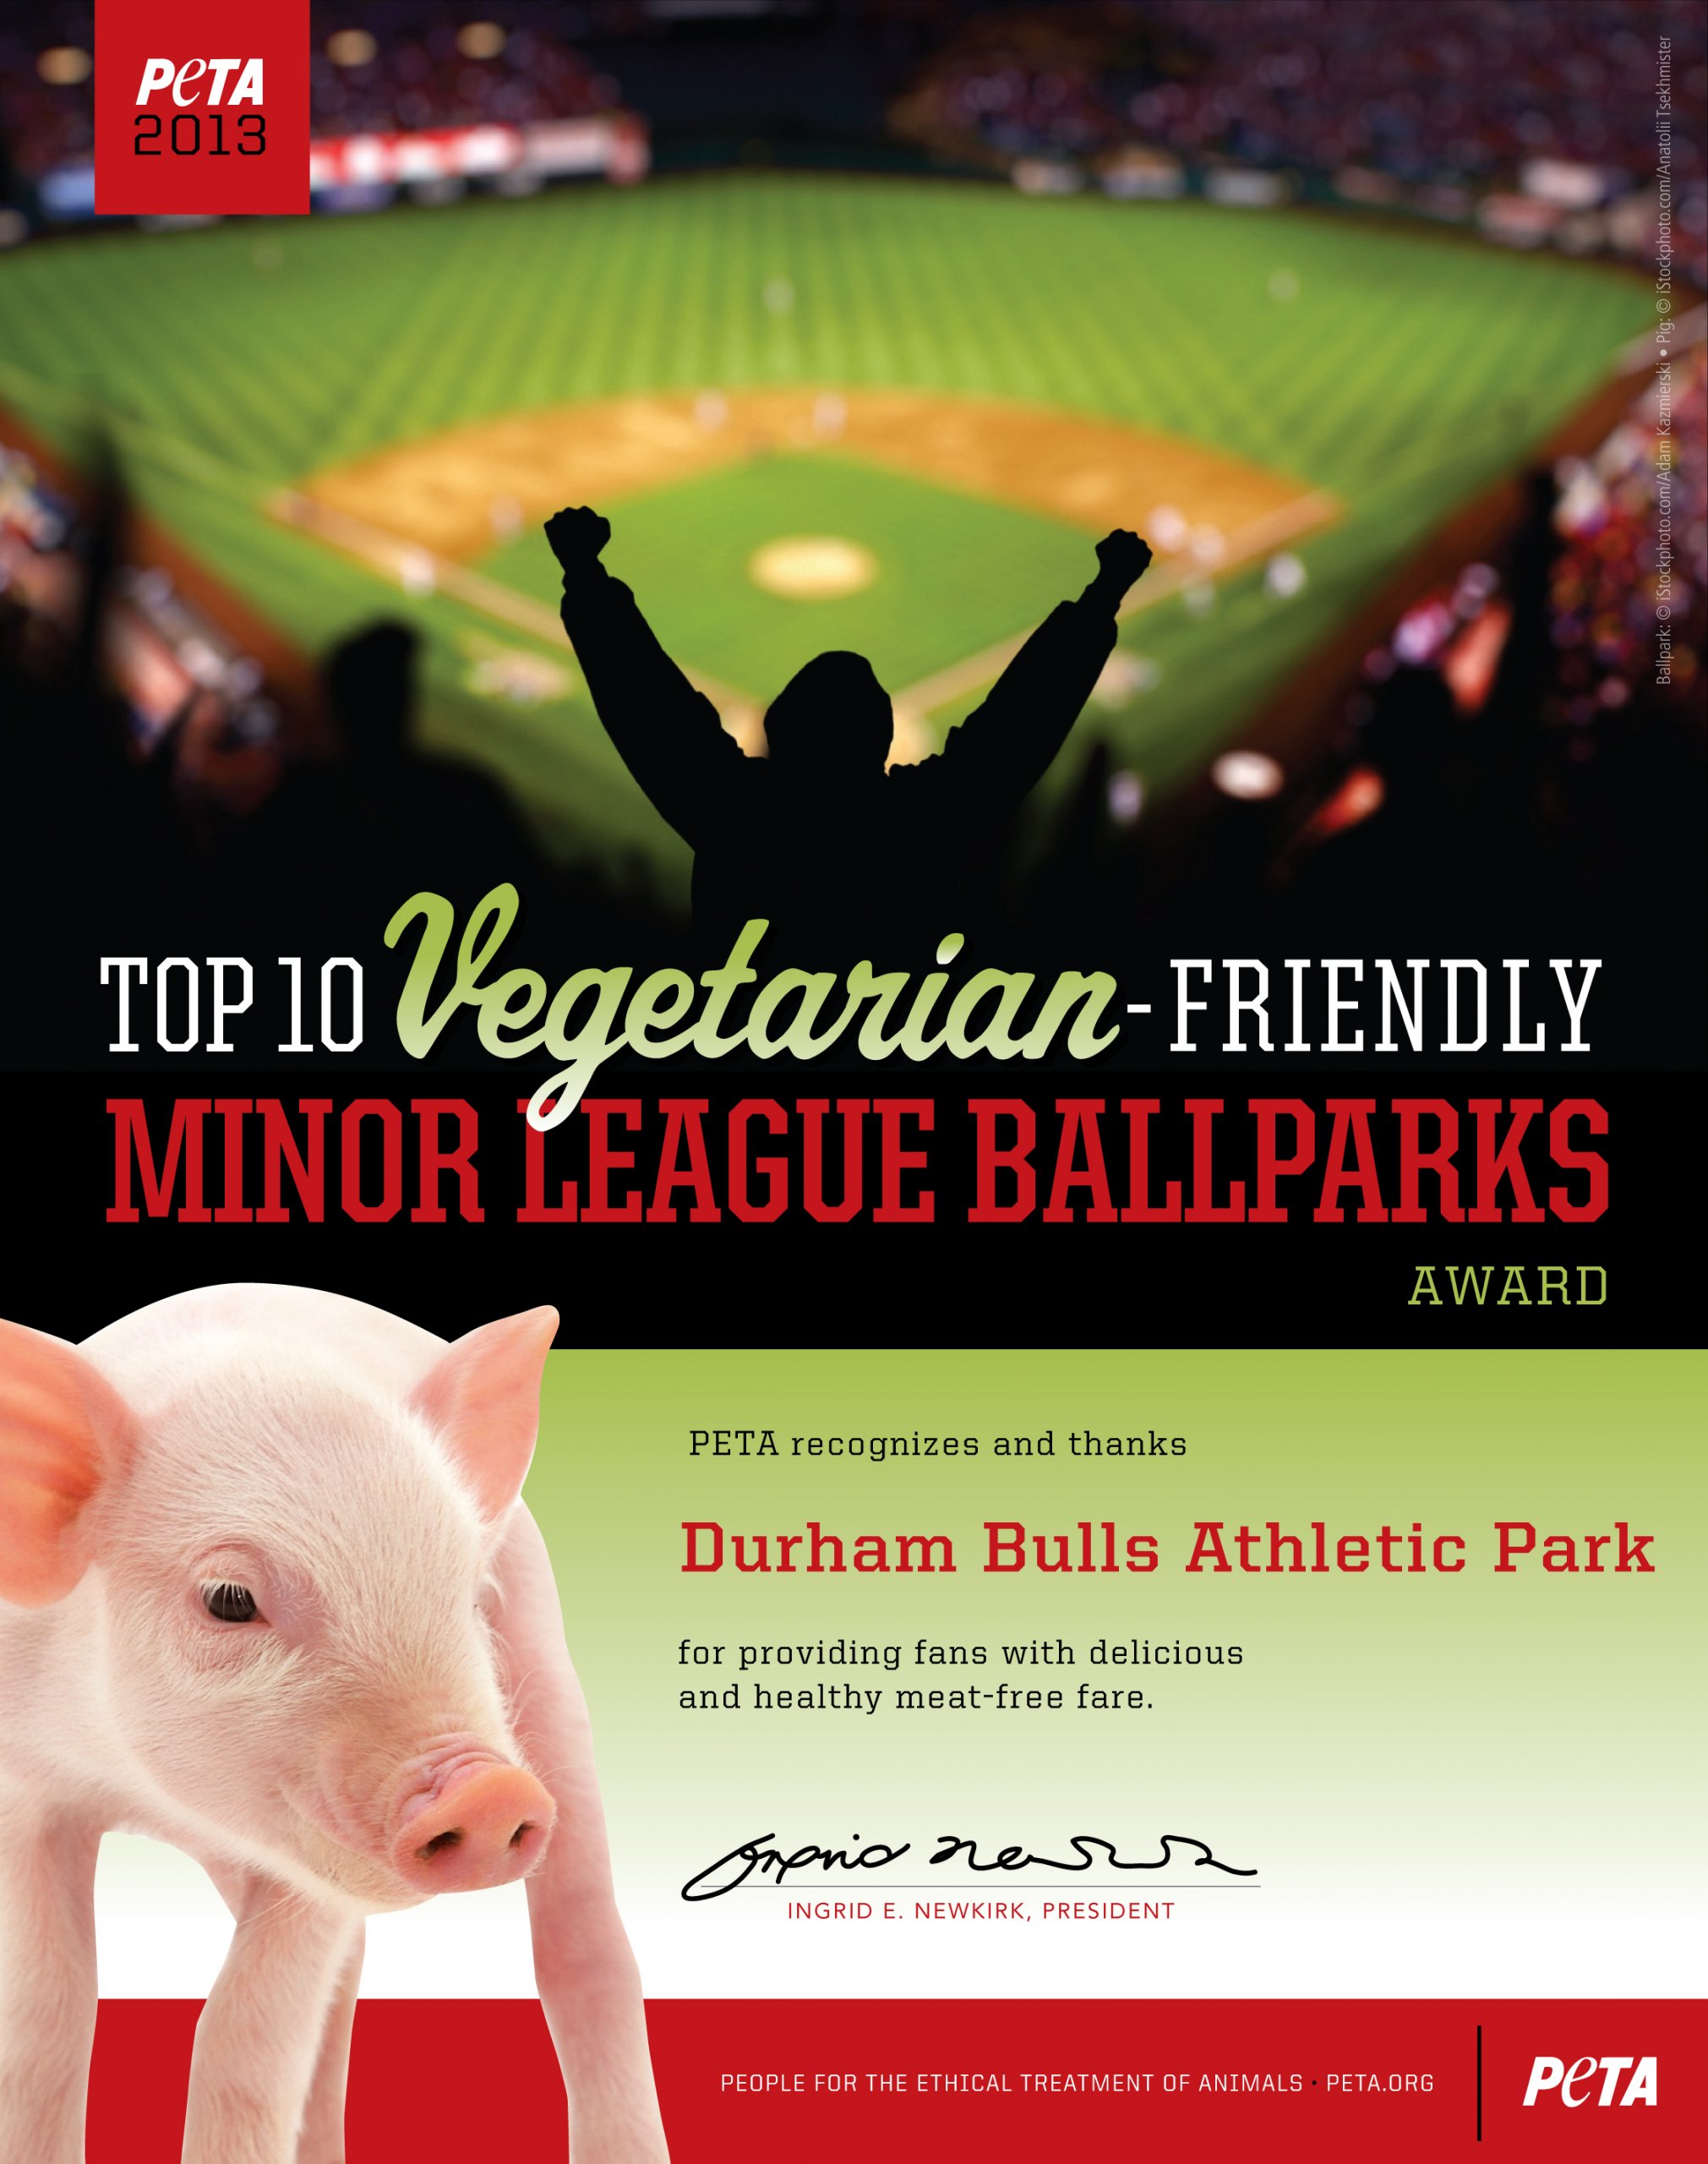 Durham Bulls Athletic Park - Where is the best ballpark in the minors? 